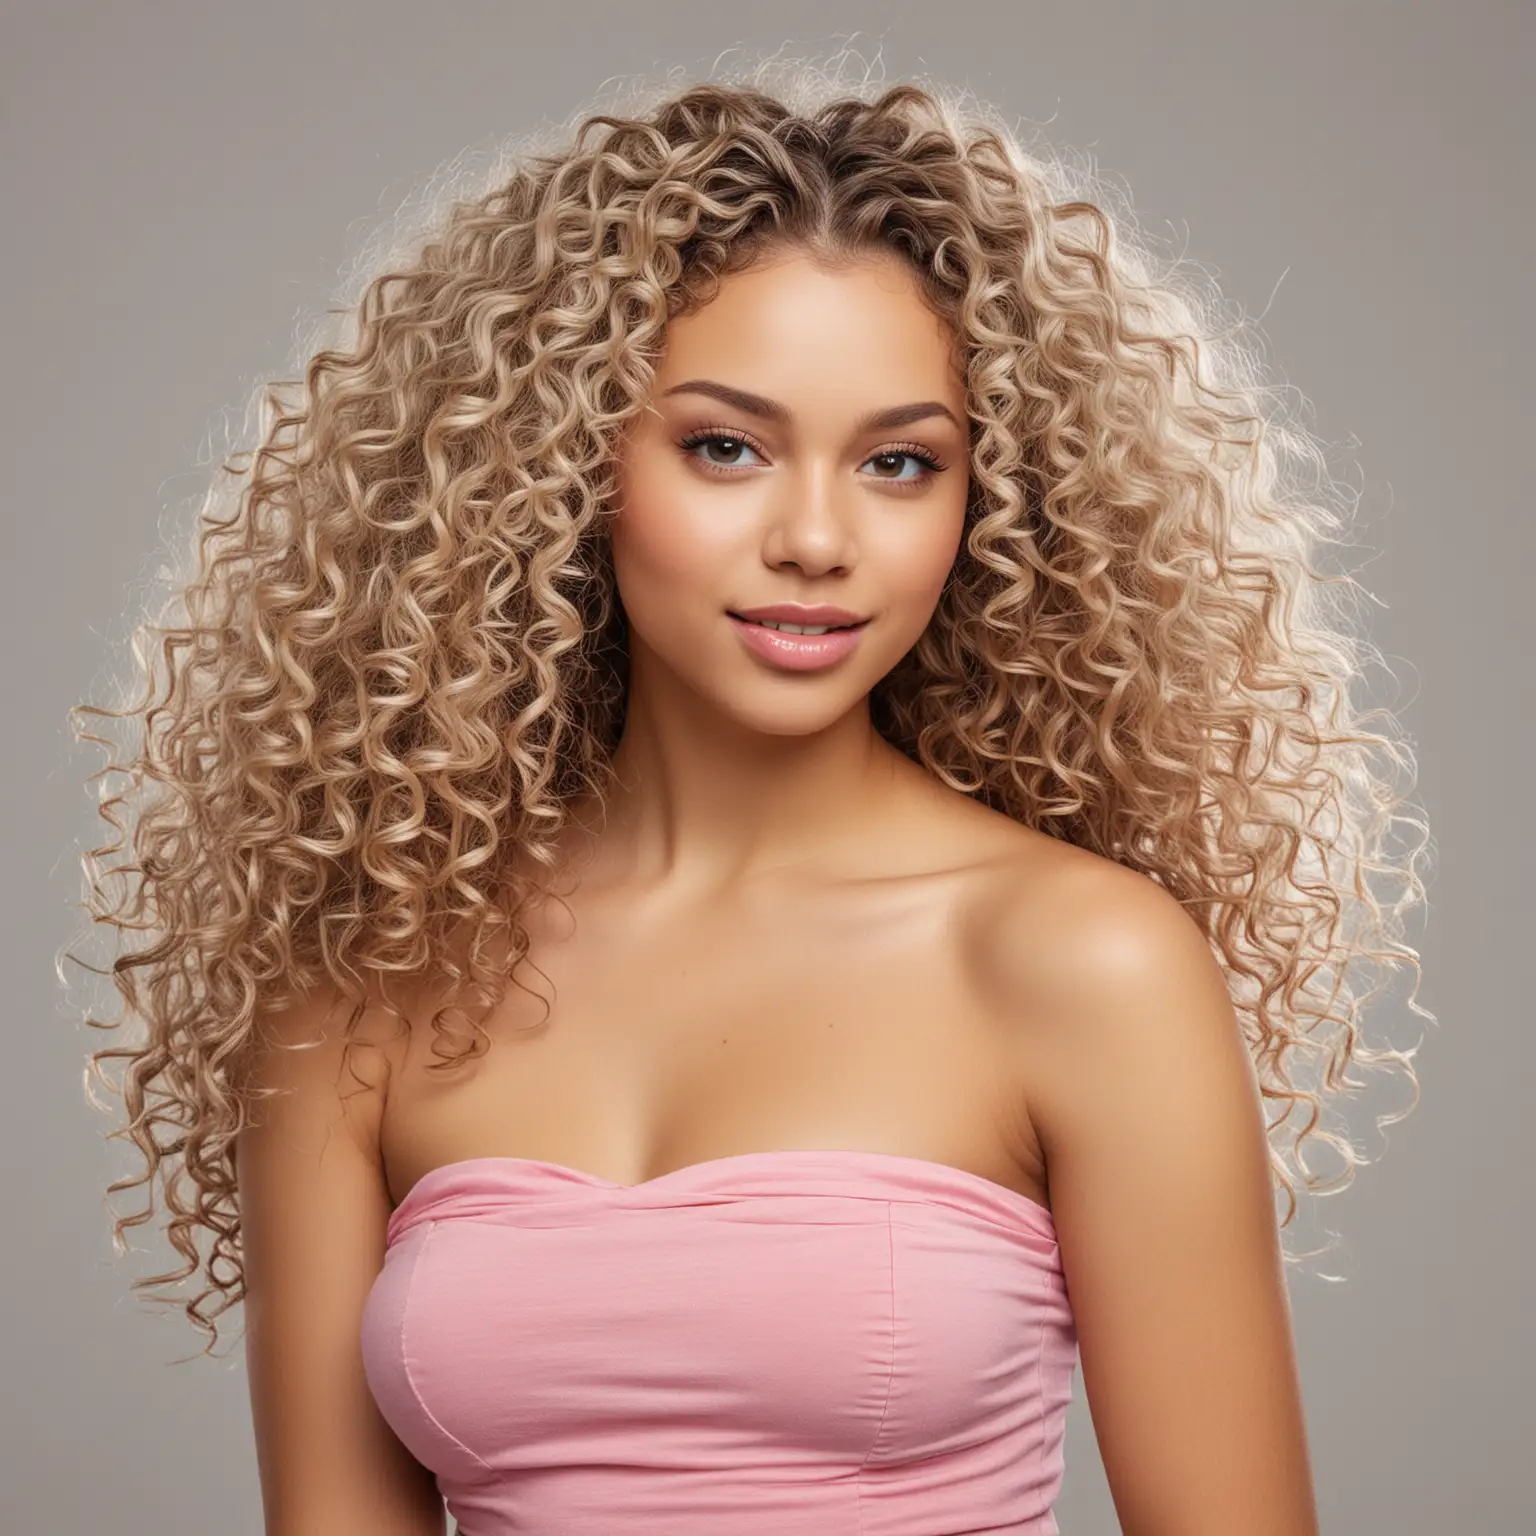 Stylish Light Skin Woman in Pink Strapless Top with Long Curly Hair